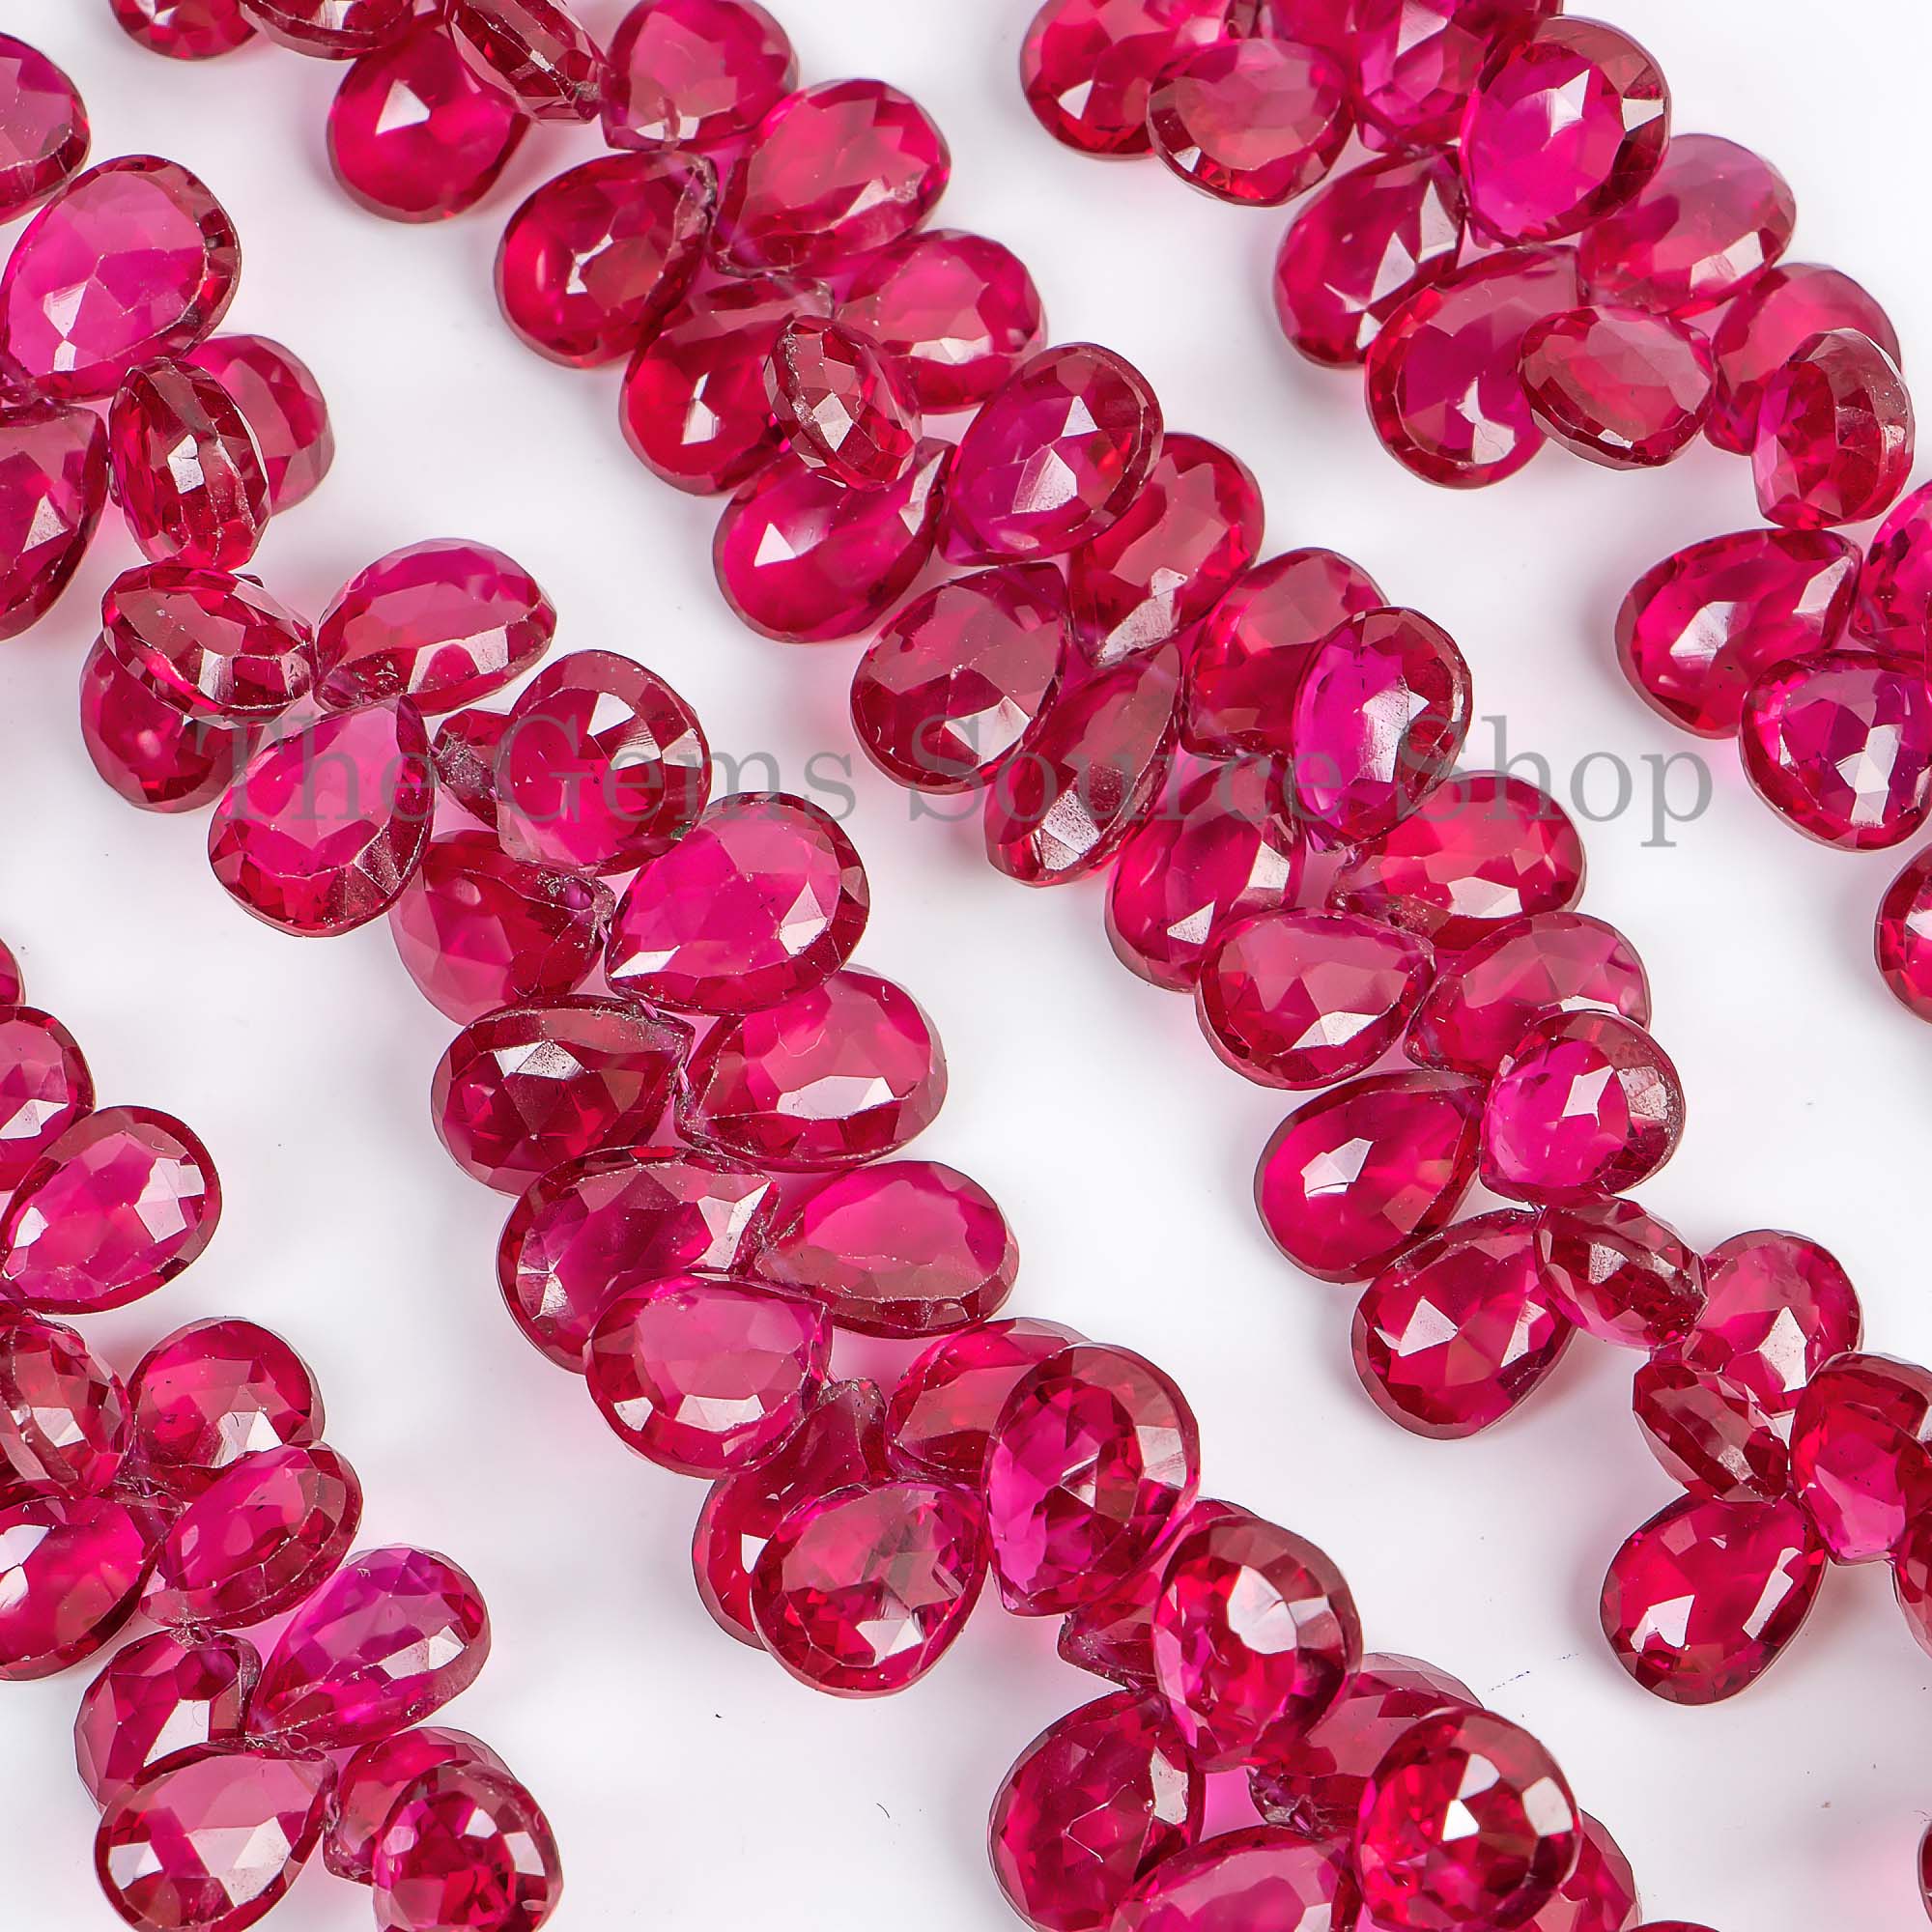 Ruby Cubic Zirconia Beads, Ruby Cubic Zirconia Pear Beads, Cubic Zirconia Faceted Beads